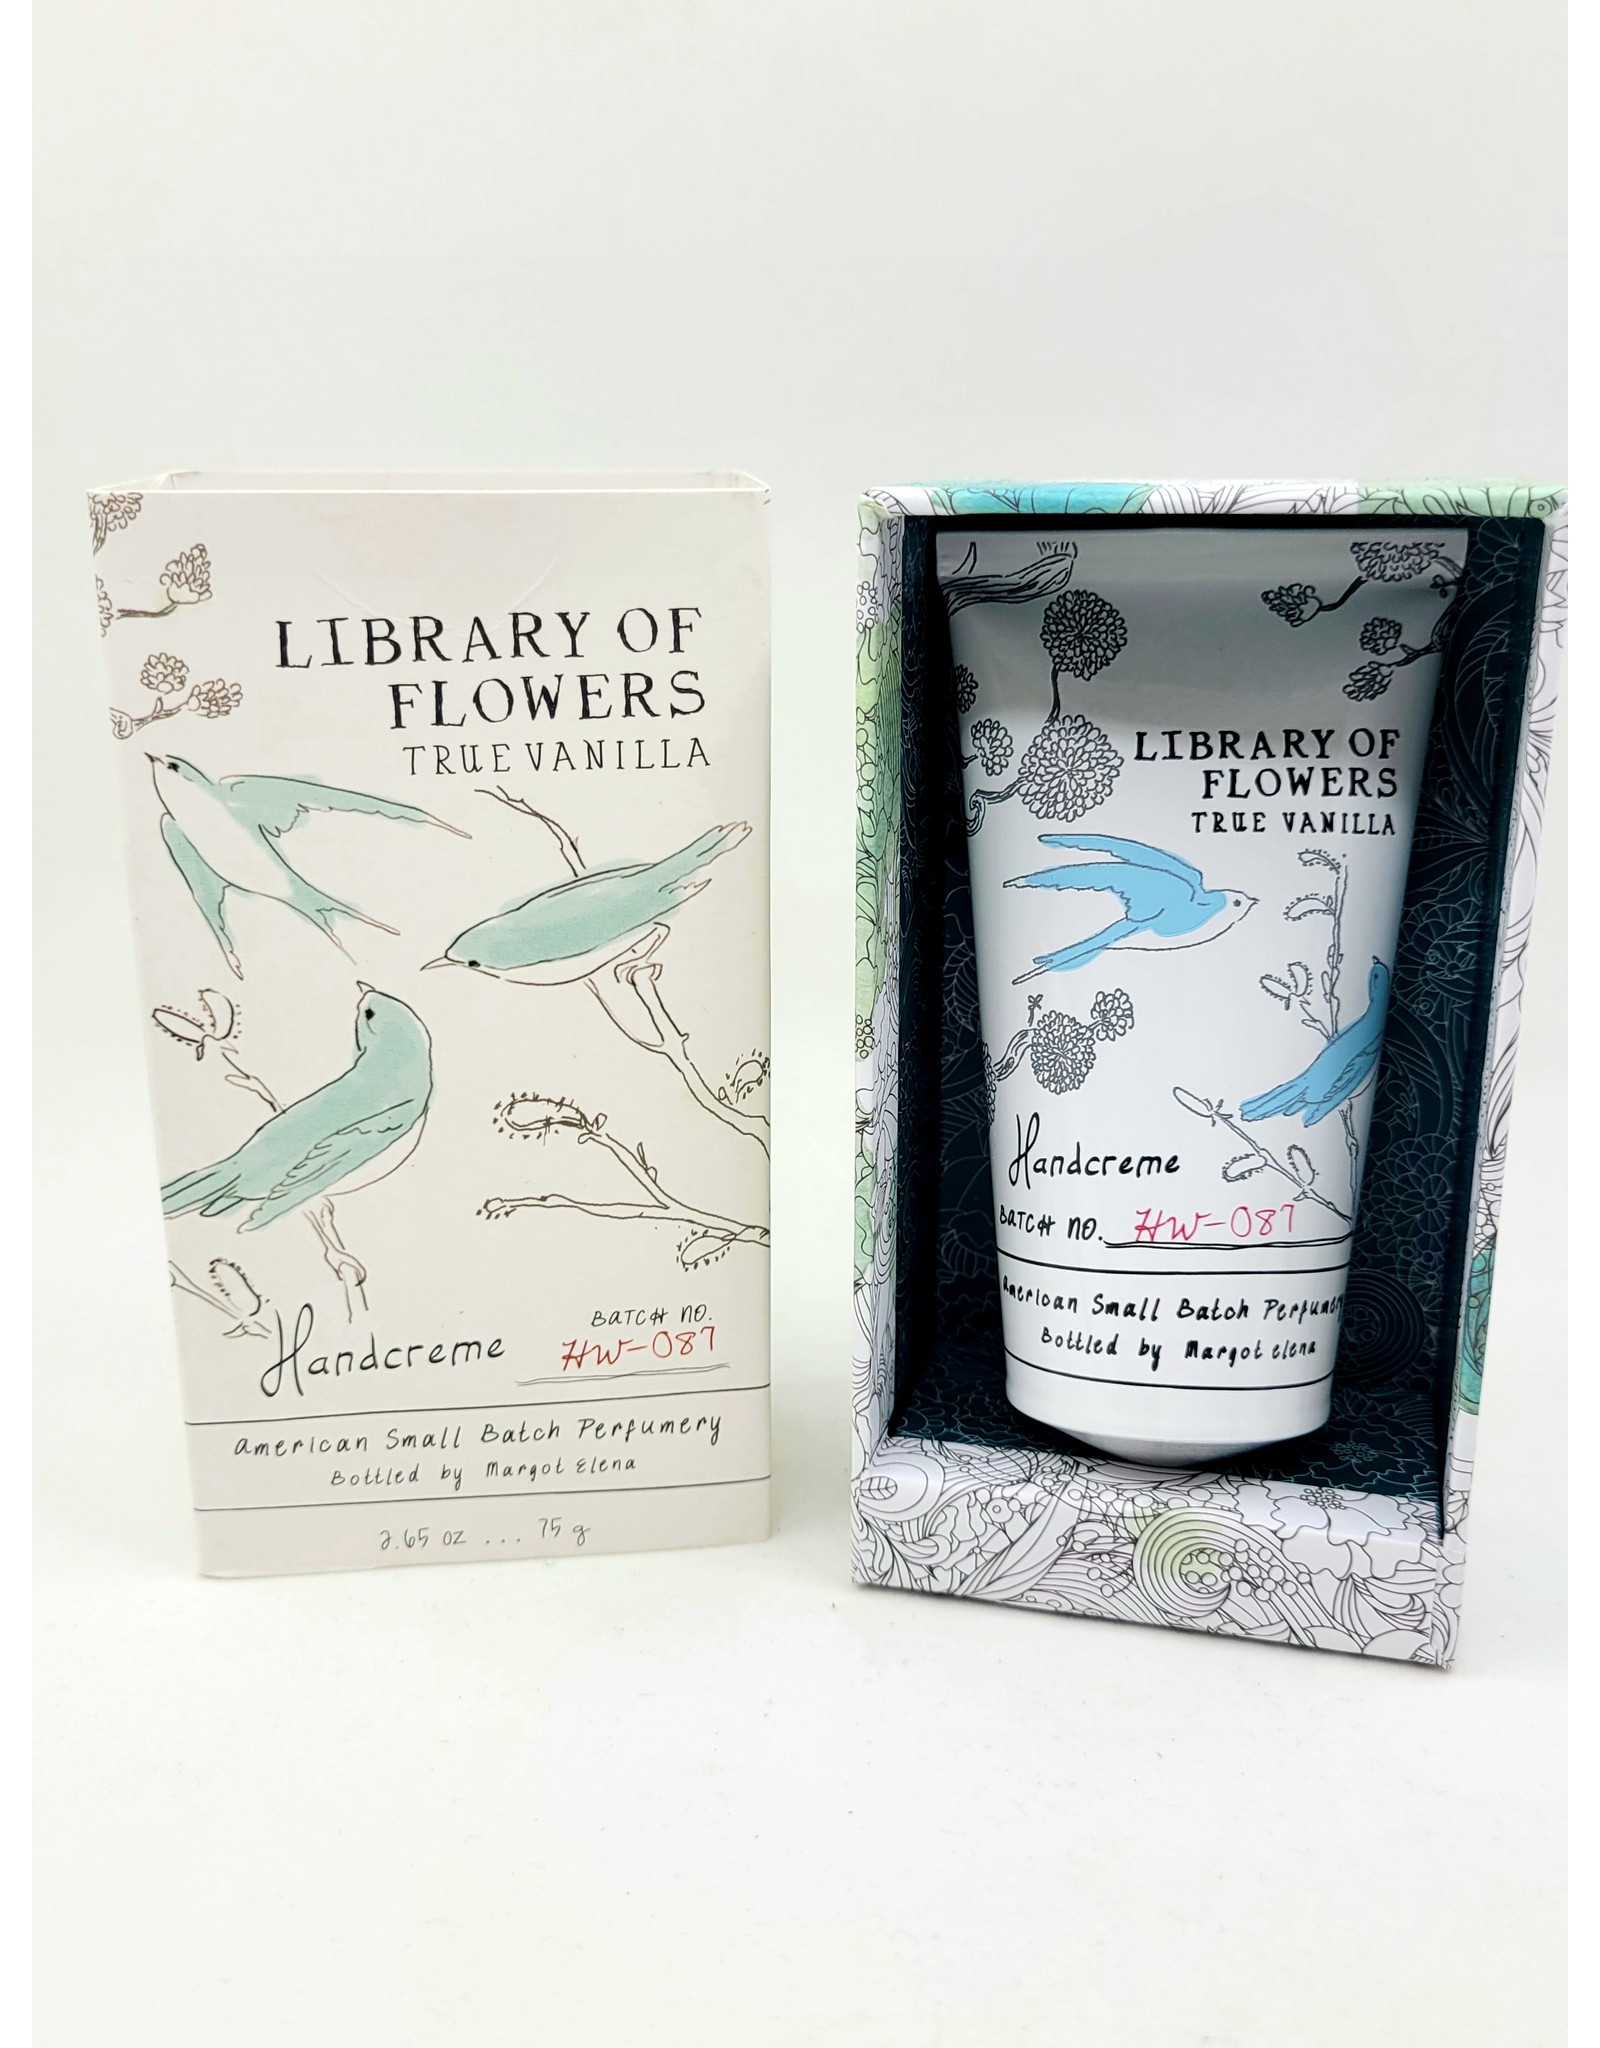 Library of Flowers LOF Boxed Handcreme